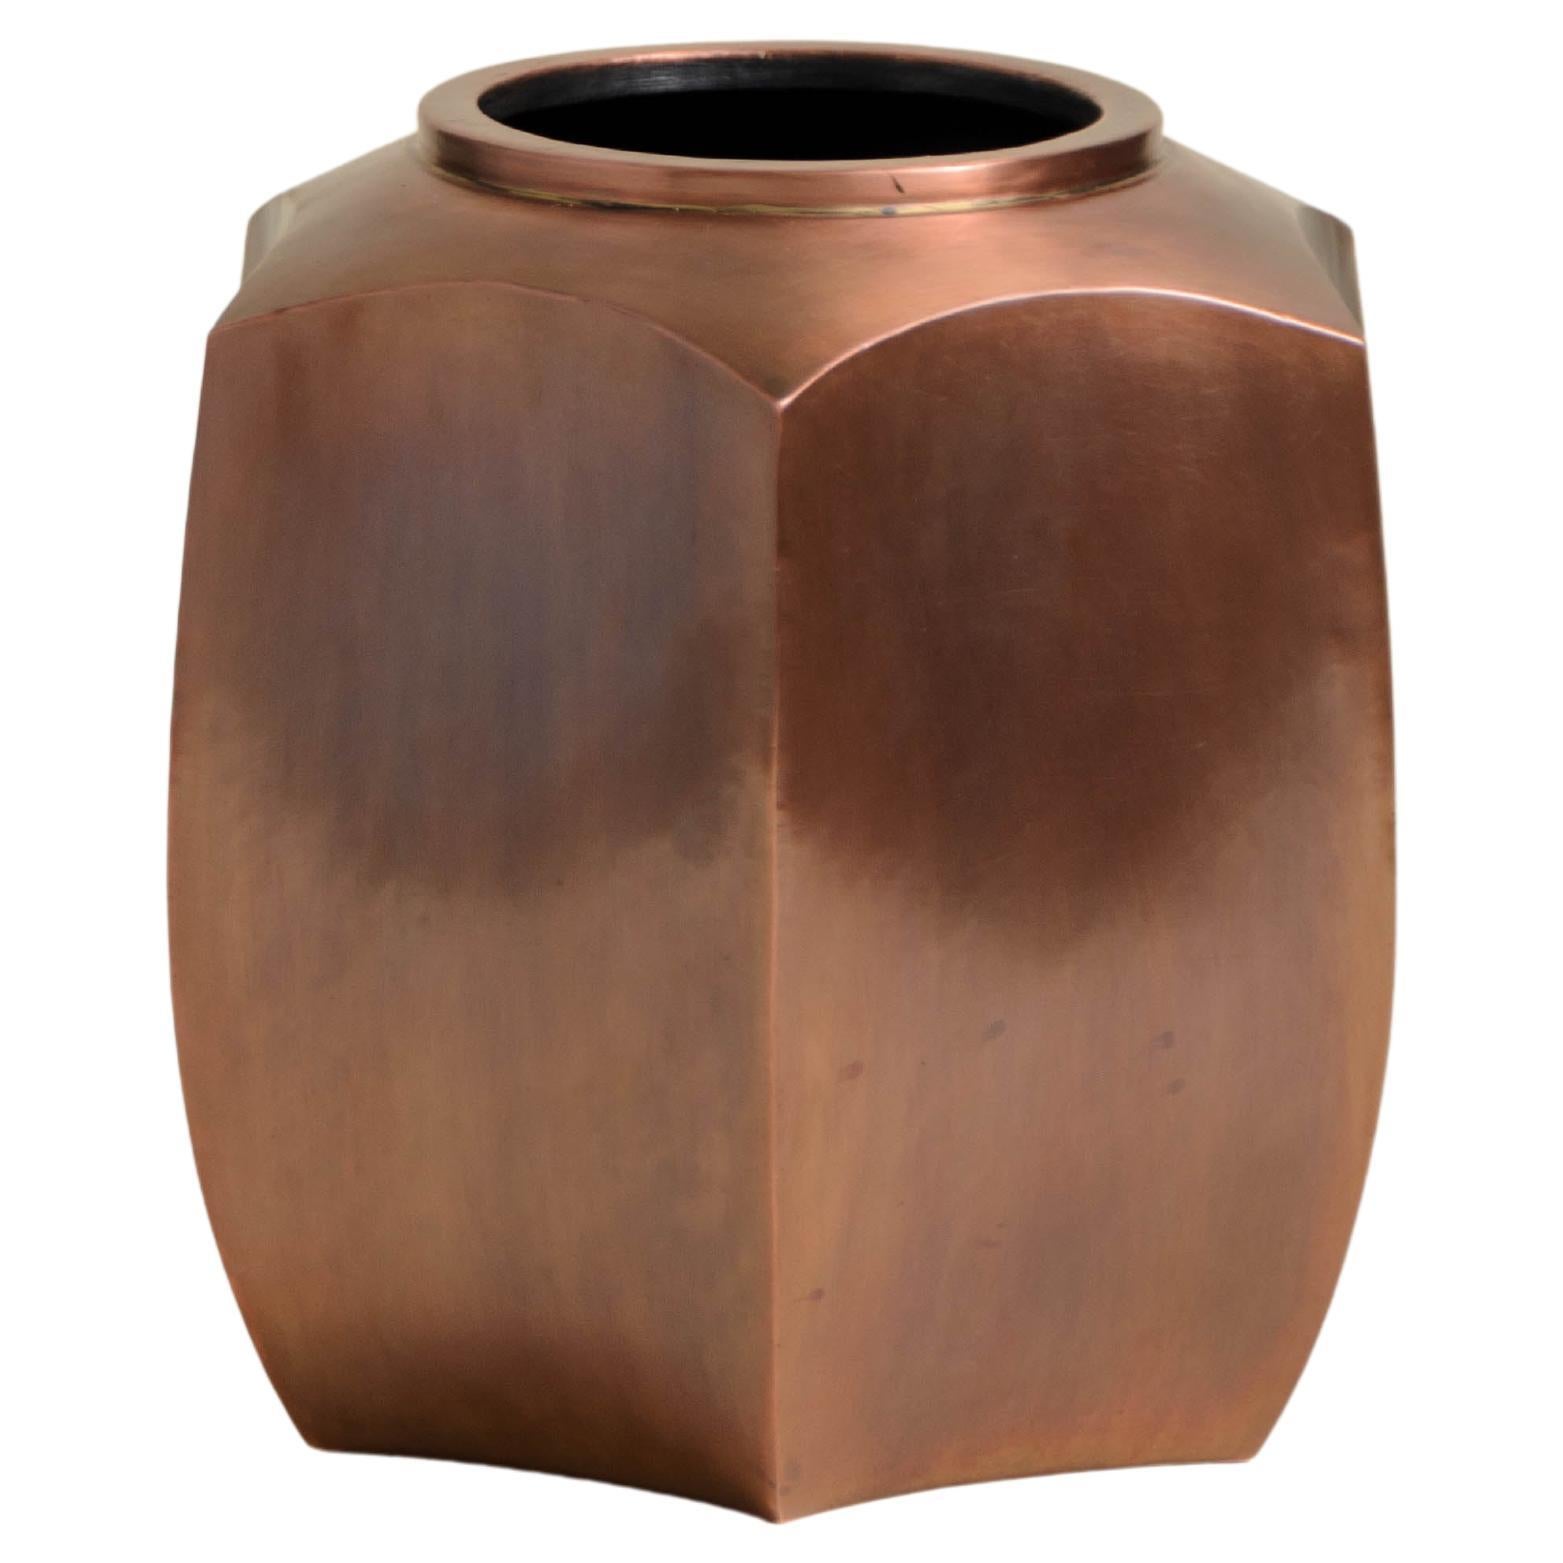 Contemporary Repoussé Hexagonal Short Jar in Antique Copper by Robert Kuo For Sale